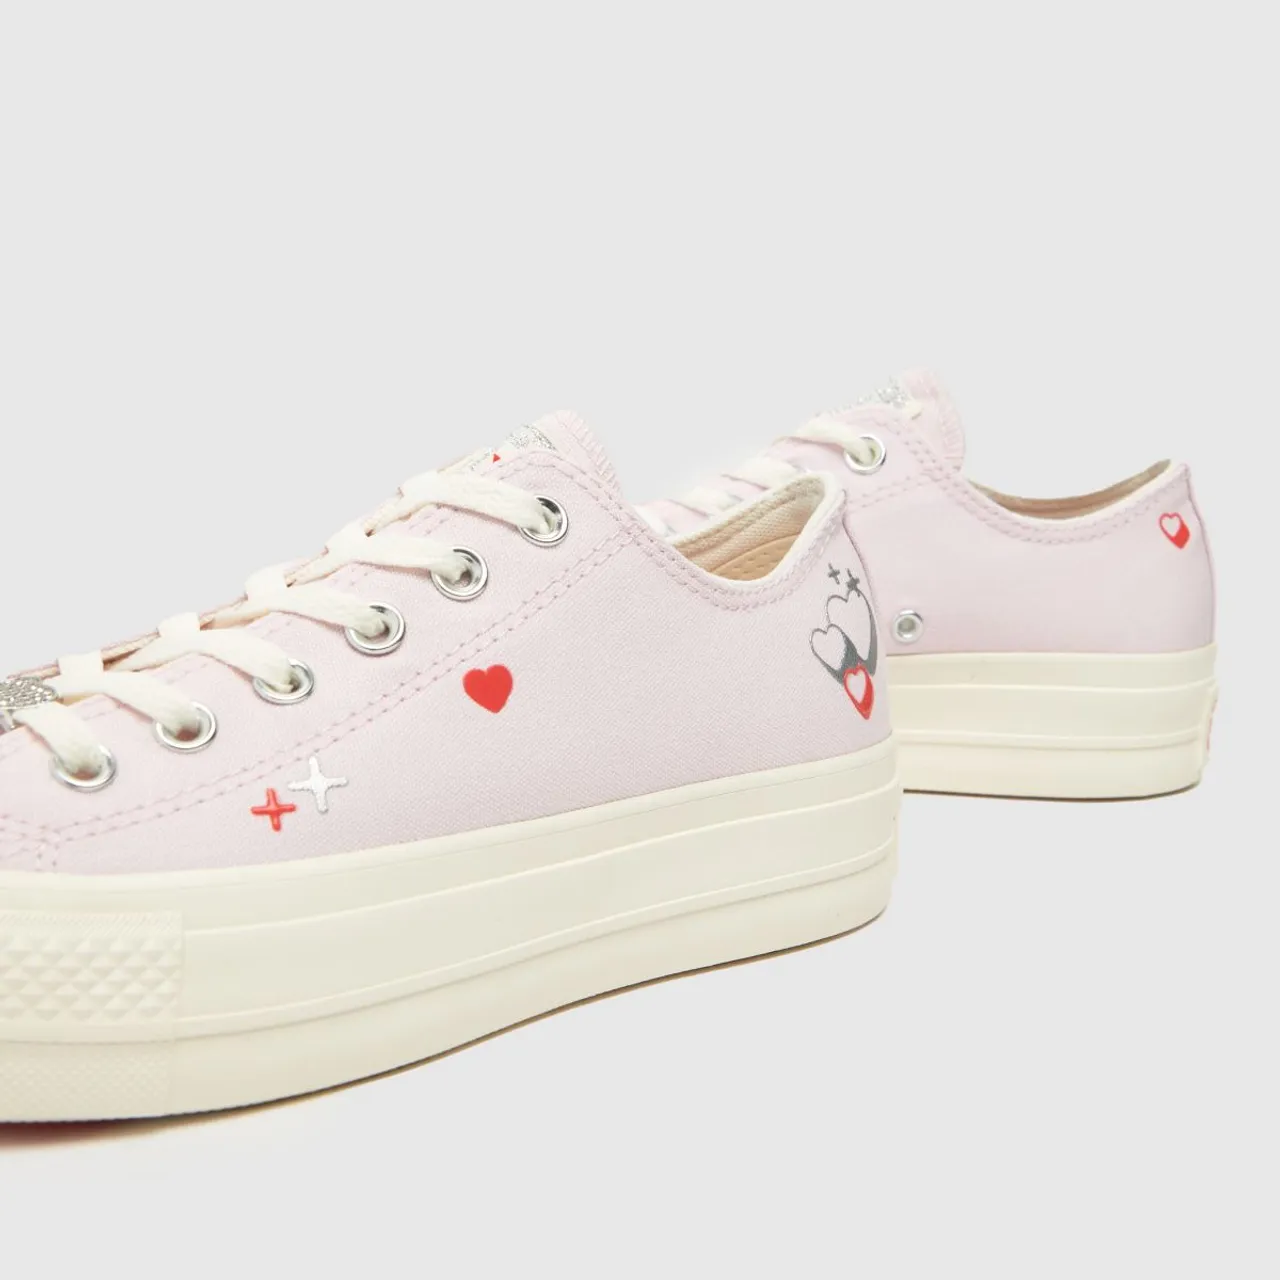 Converse all Star Lift ox y2k Heart Trainers in Lilac